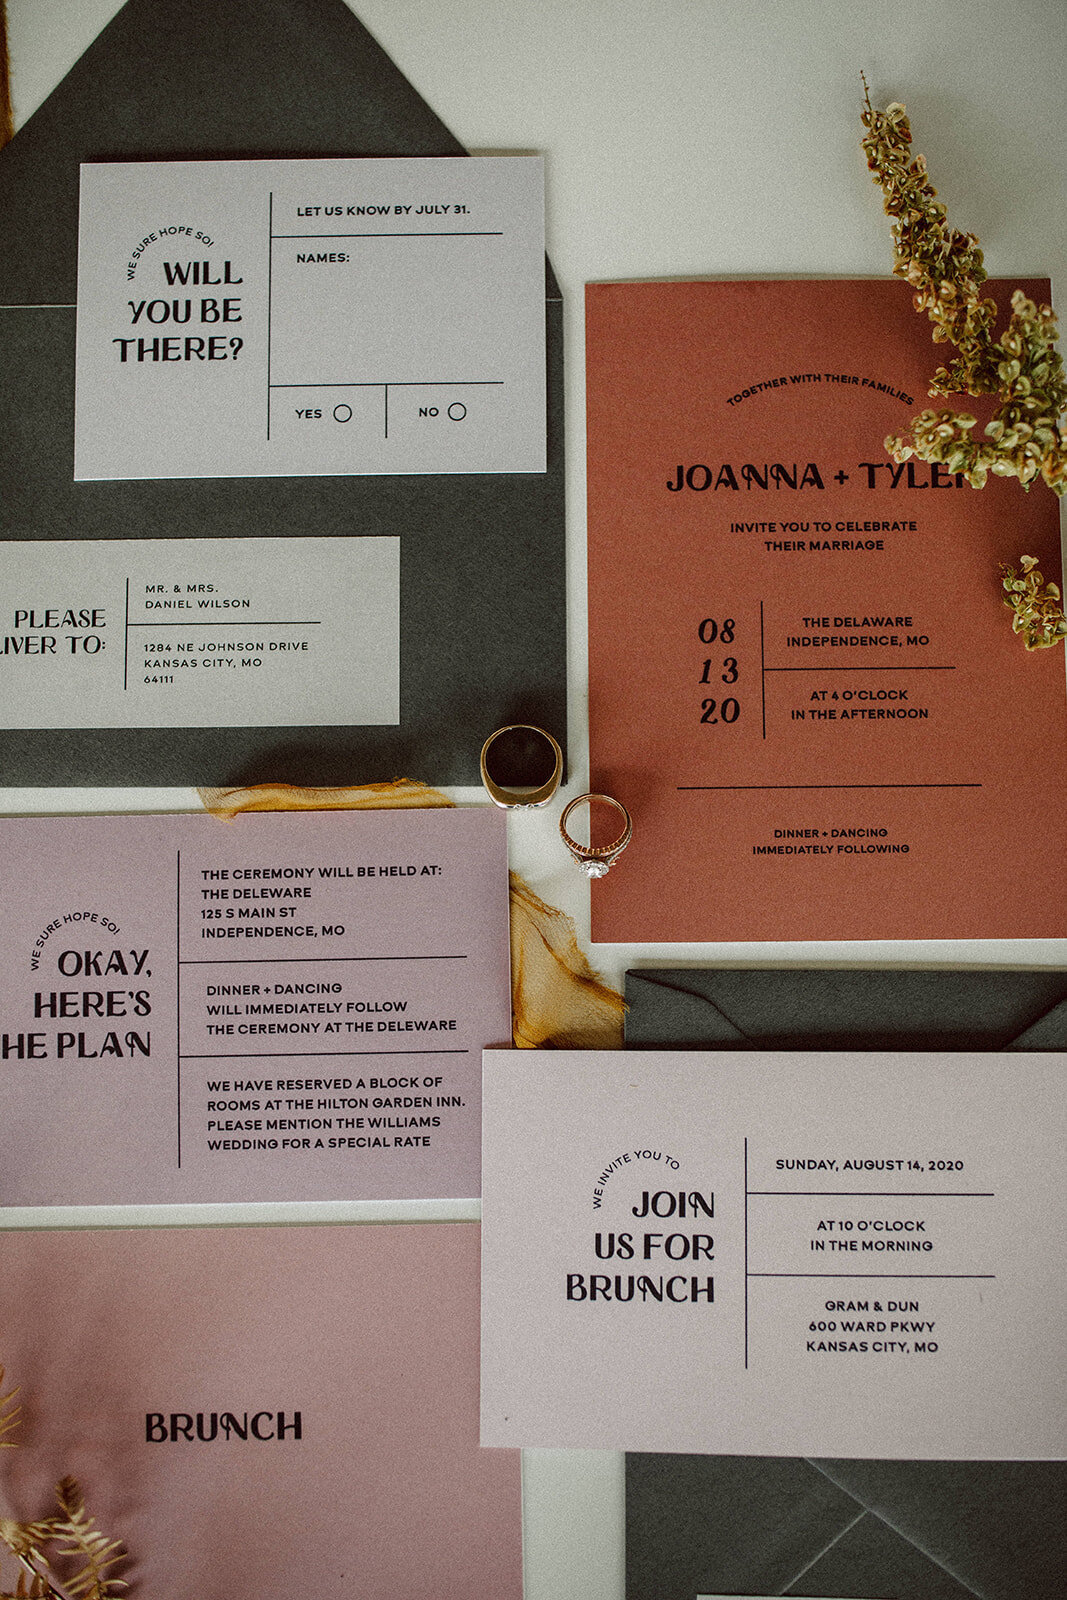 Peach, mauve, and off-white wedding stationery with black font atop and wedding bands with ribbon and stems.